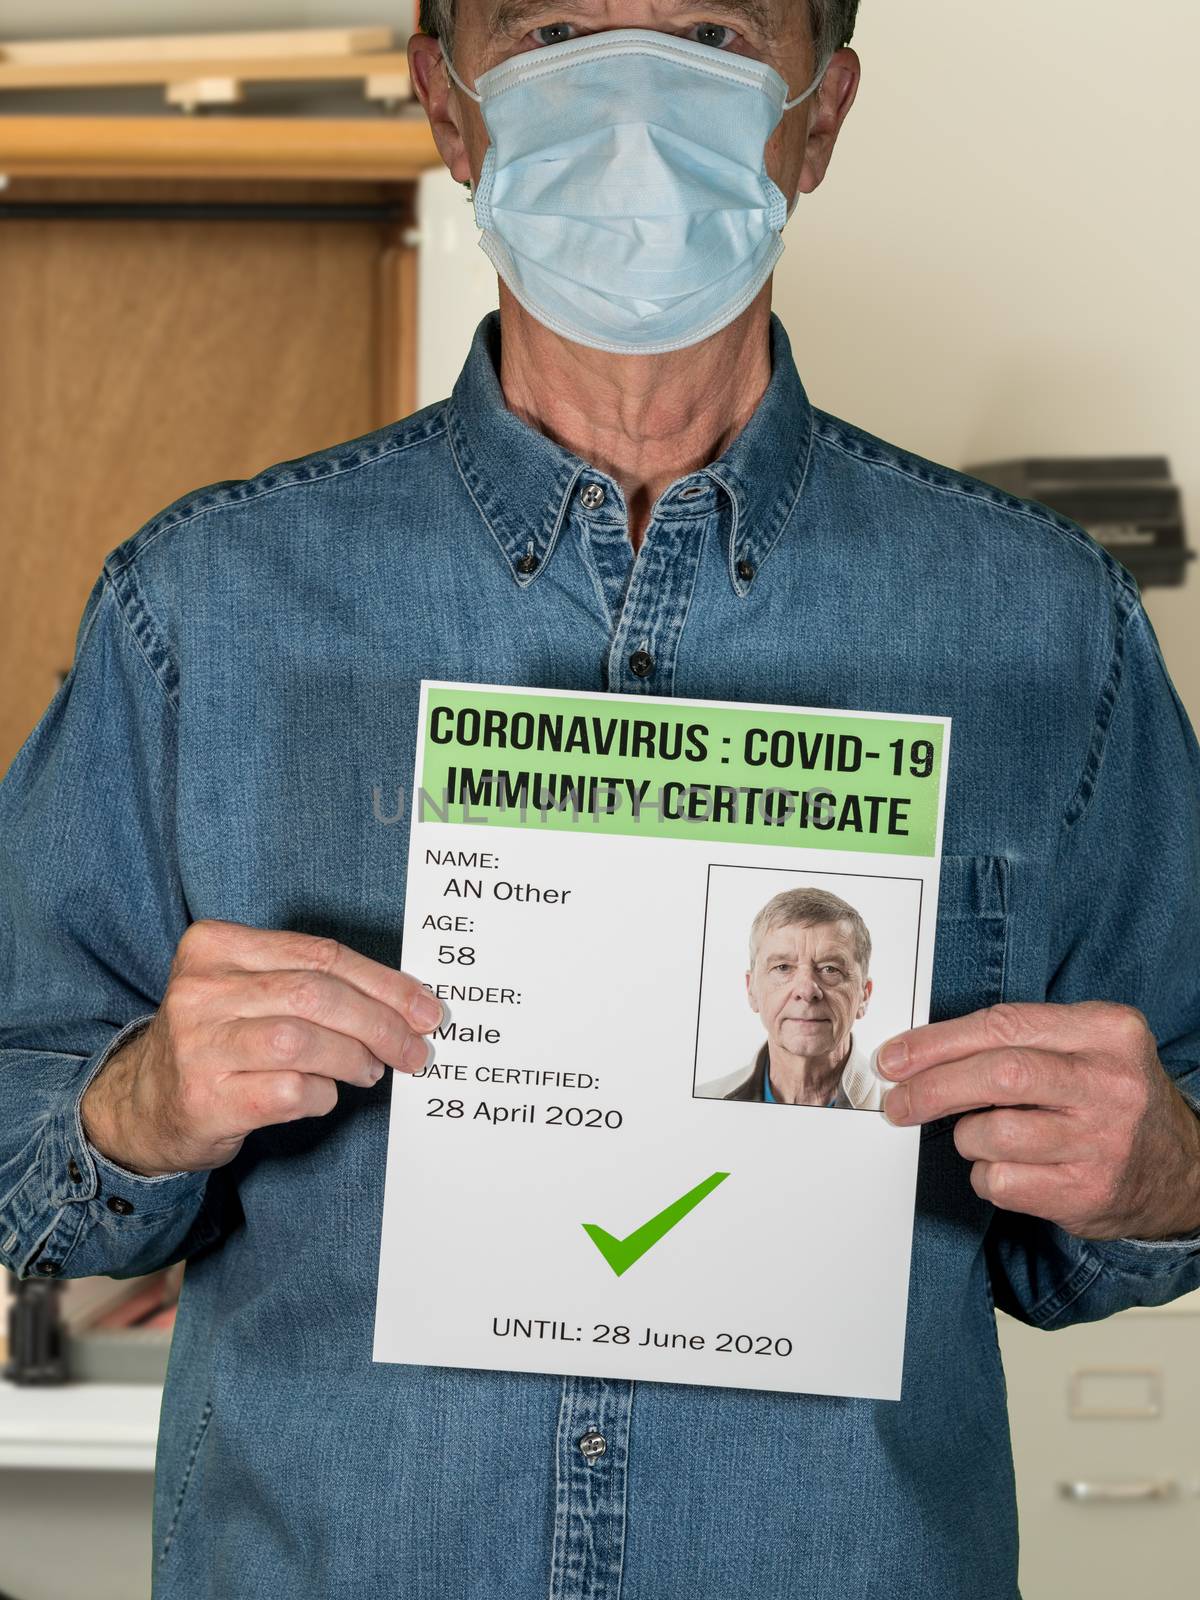 Male blue collar worker concept of immunity testing and certification to allow people to go back to work after negative test